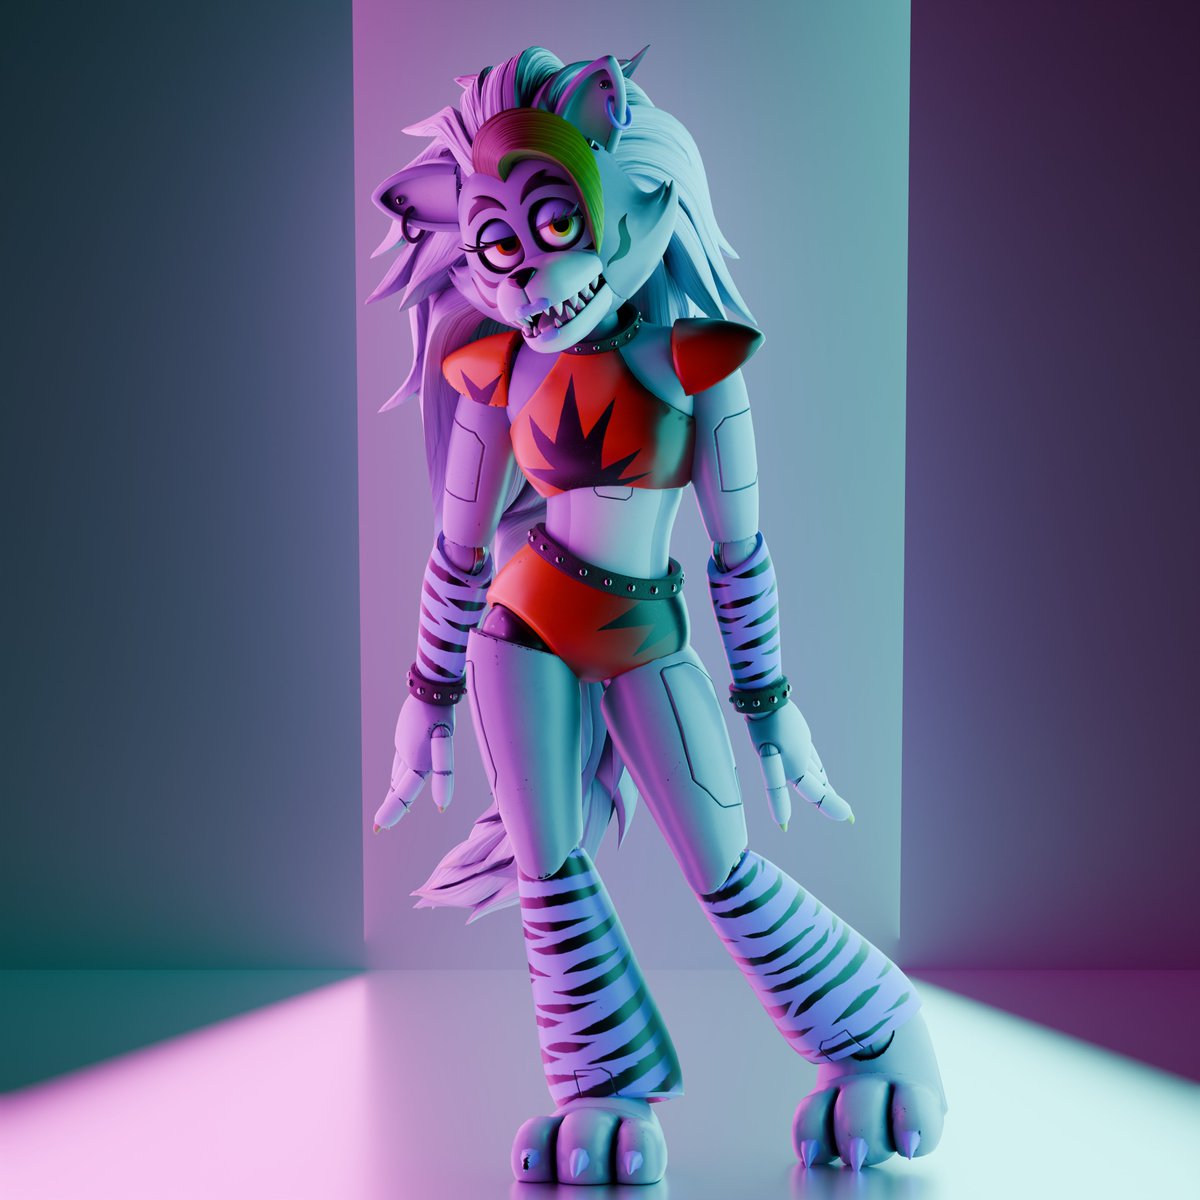 ANOTHER ROXY RENDER HAS IT THE FYP ‼️ ‼️ ‼️

#Blender #fnaf #fnafsb #fnafsecuritybreach